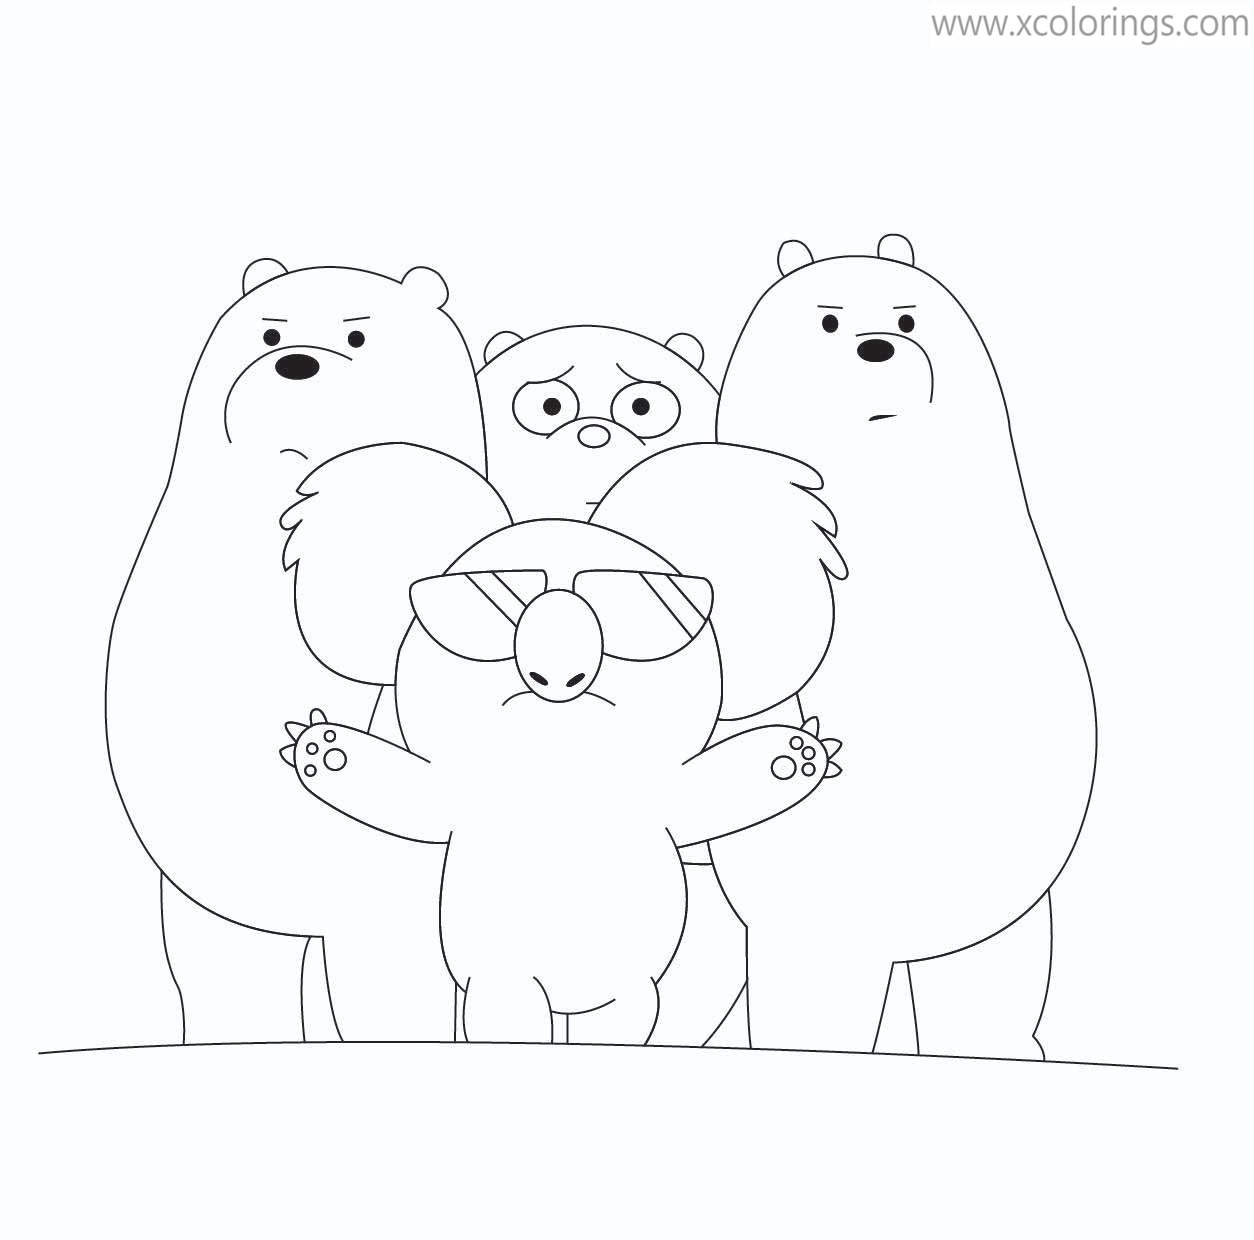 Free We Bare Bears Coloring Pages Bears and Nom Nom printable